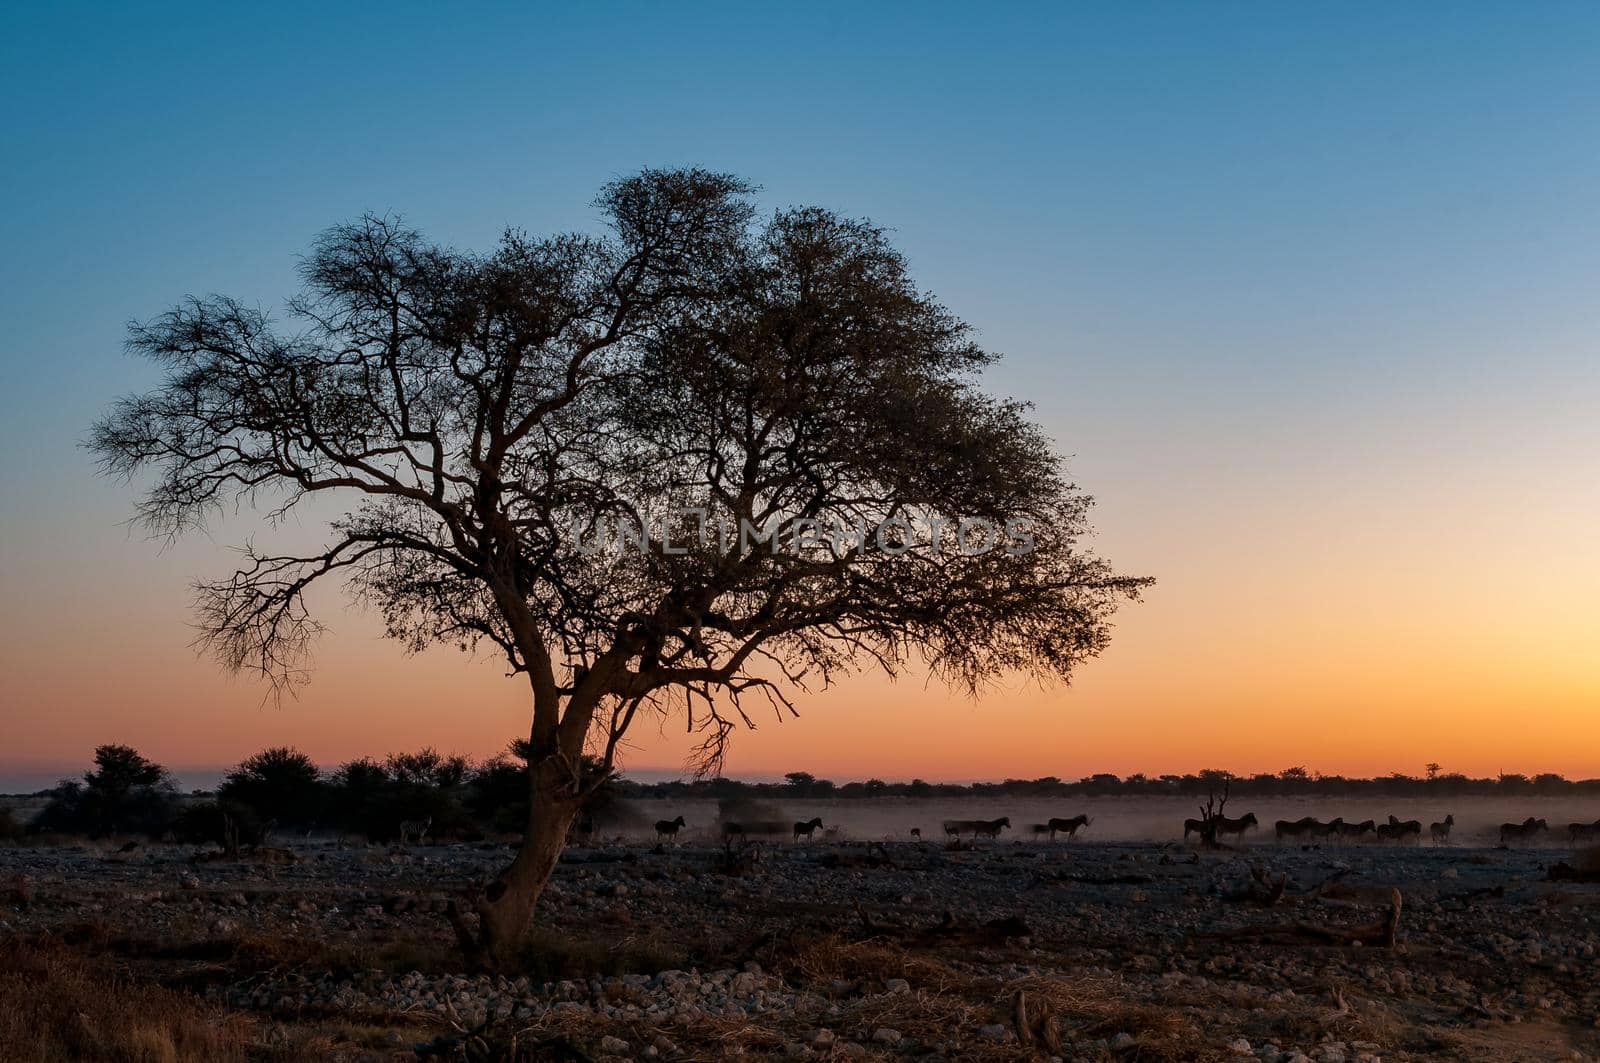 Silhouettes of Burchells zebras walking past large tree at sunset by dpreezg